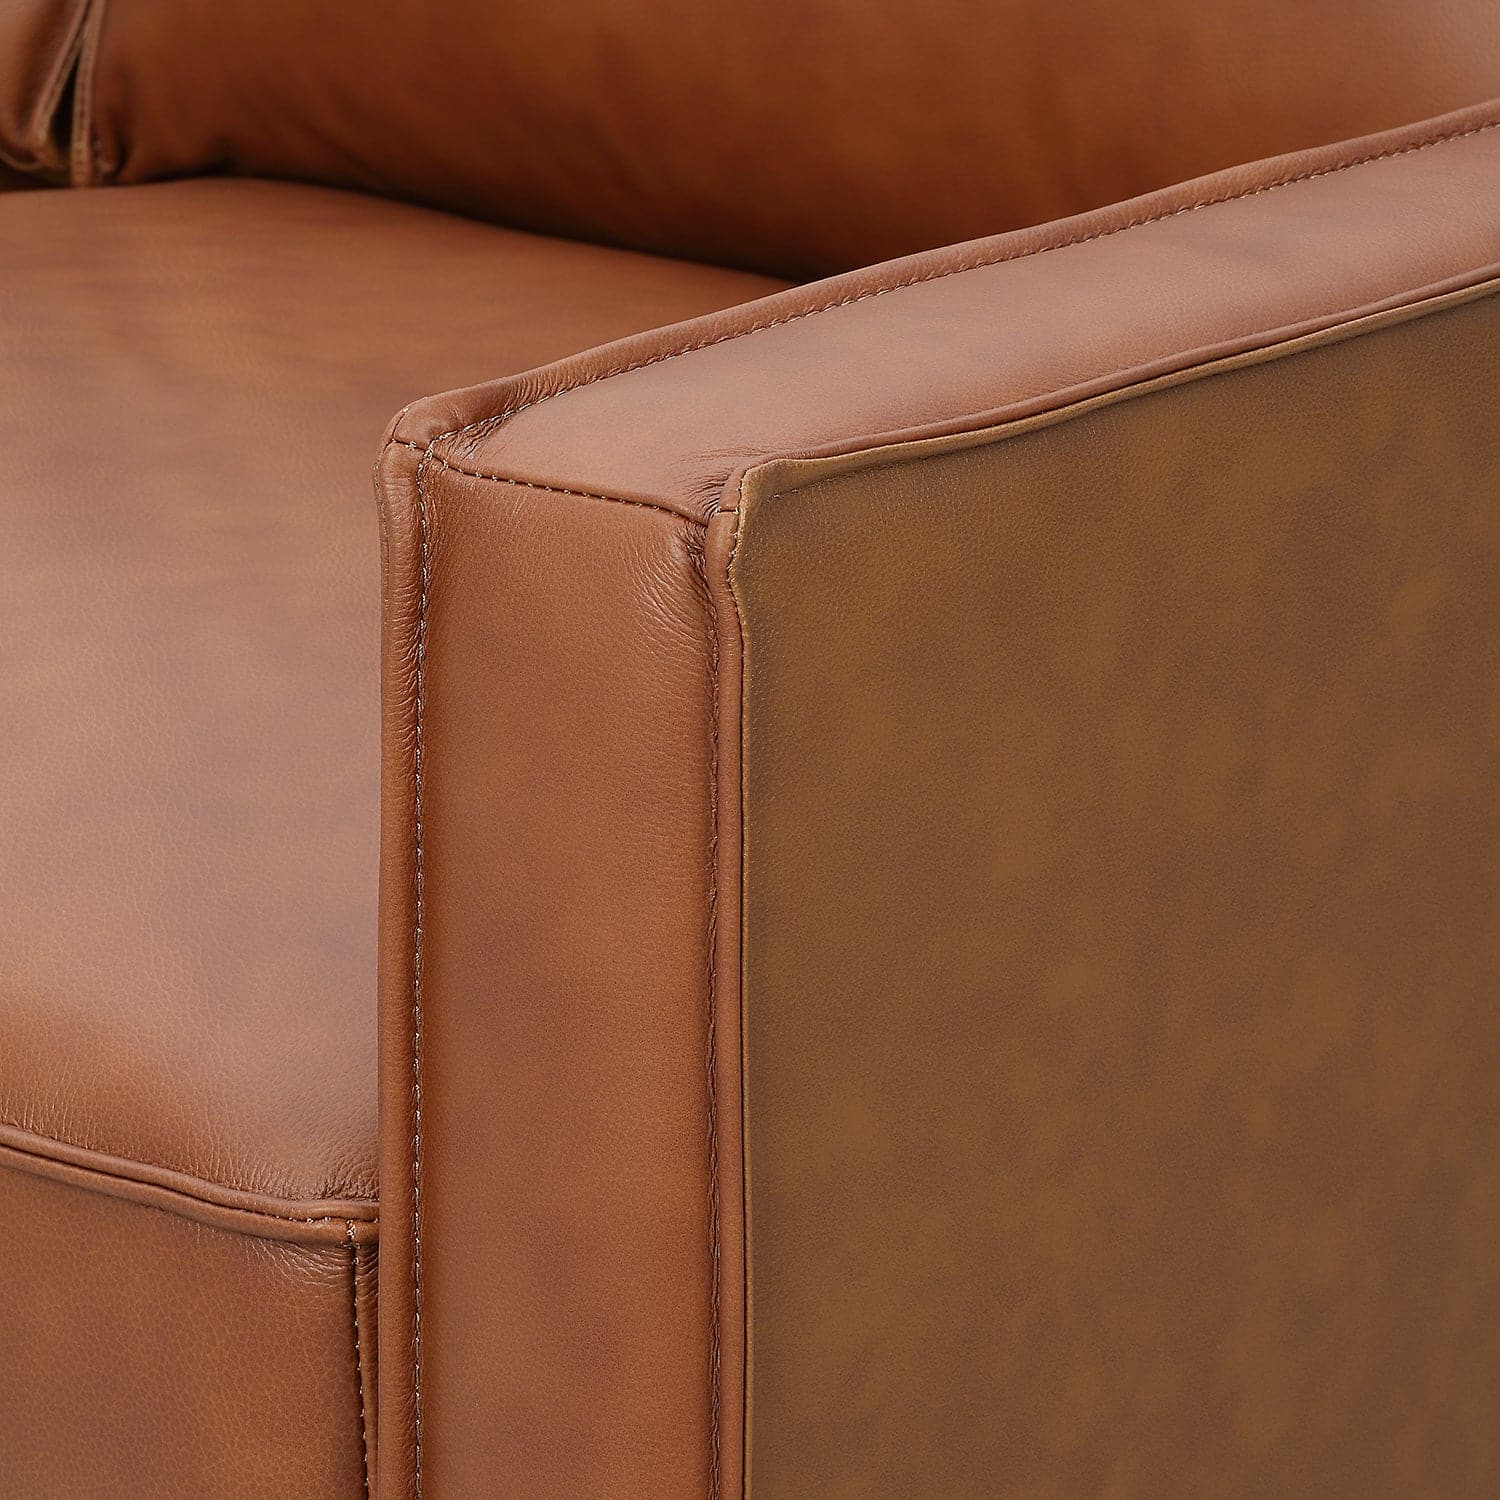 Pimlico Camel Brown Top Grain Leather Accent Chair with Ottoman